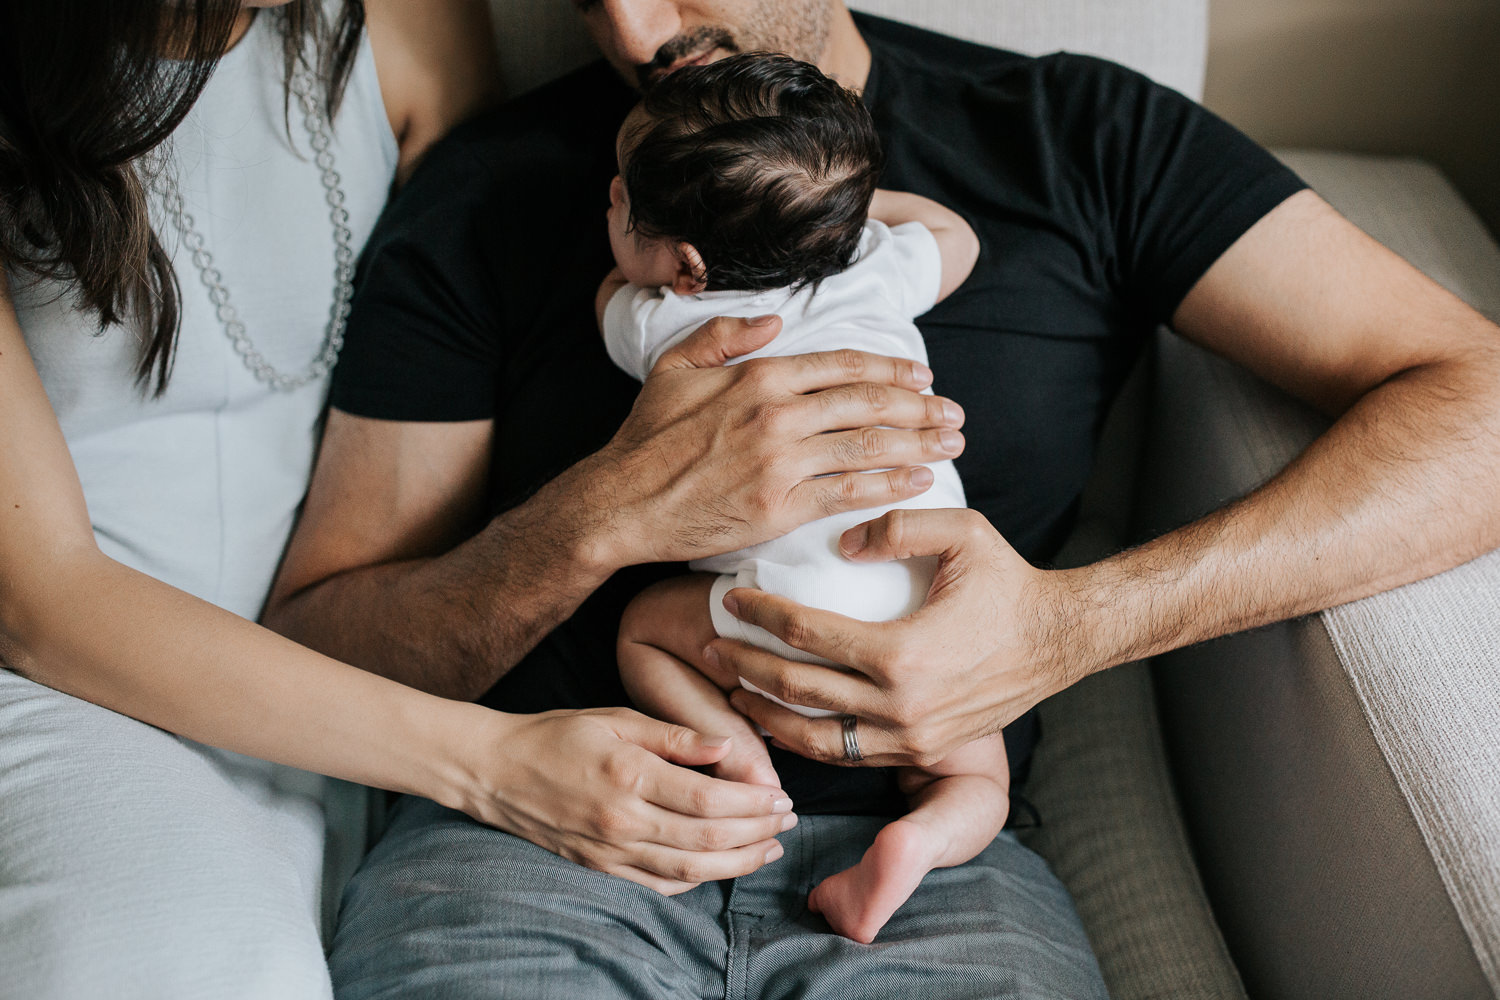 new parents sitting on couch, dad holding 1 month old baby boy in onesie with dark hair, mom snuggled up next to husband with hand on son's foot - York Region In-Home Photos